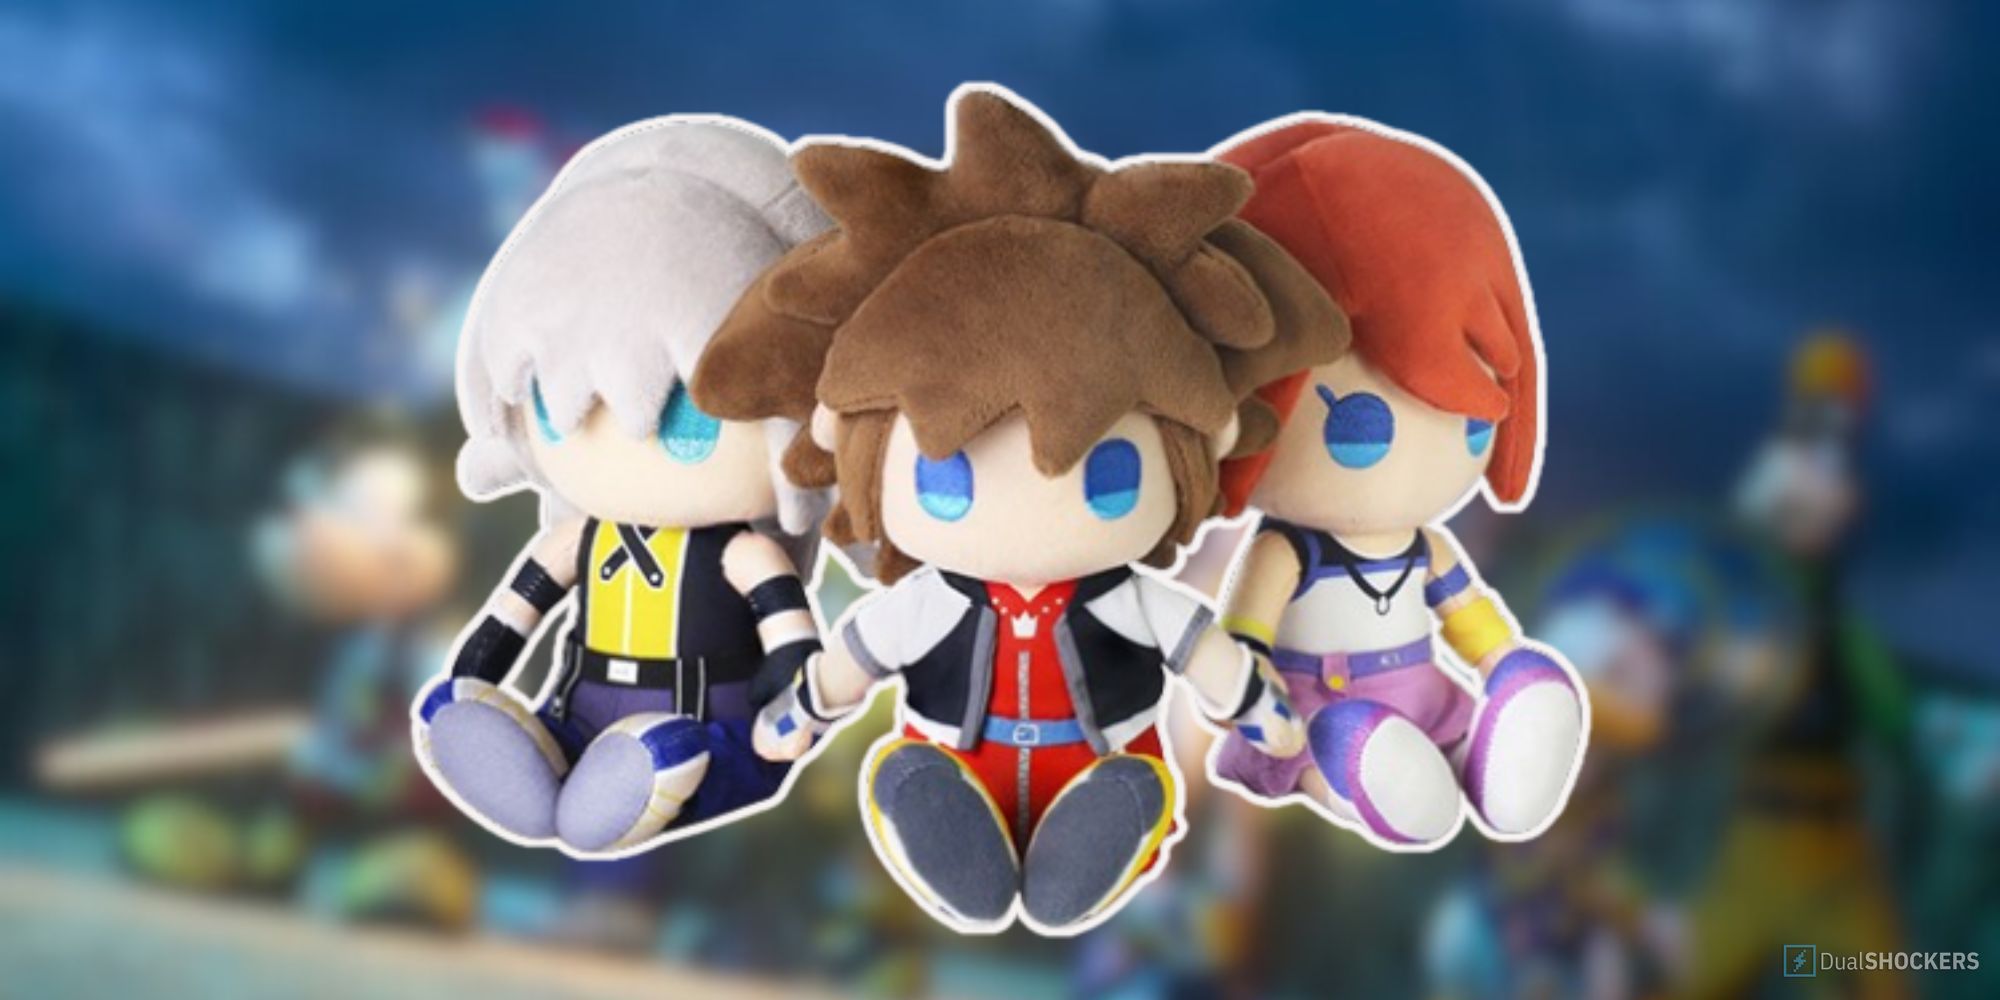 Feature image on a blurry background with three Kingdom Hearts Plushes in the foreground.